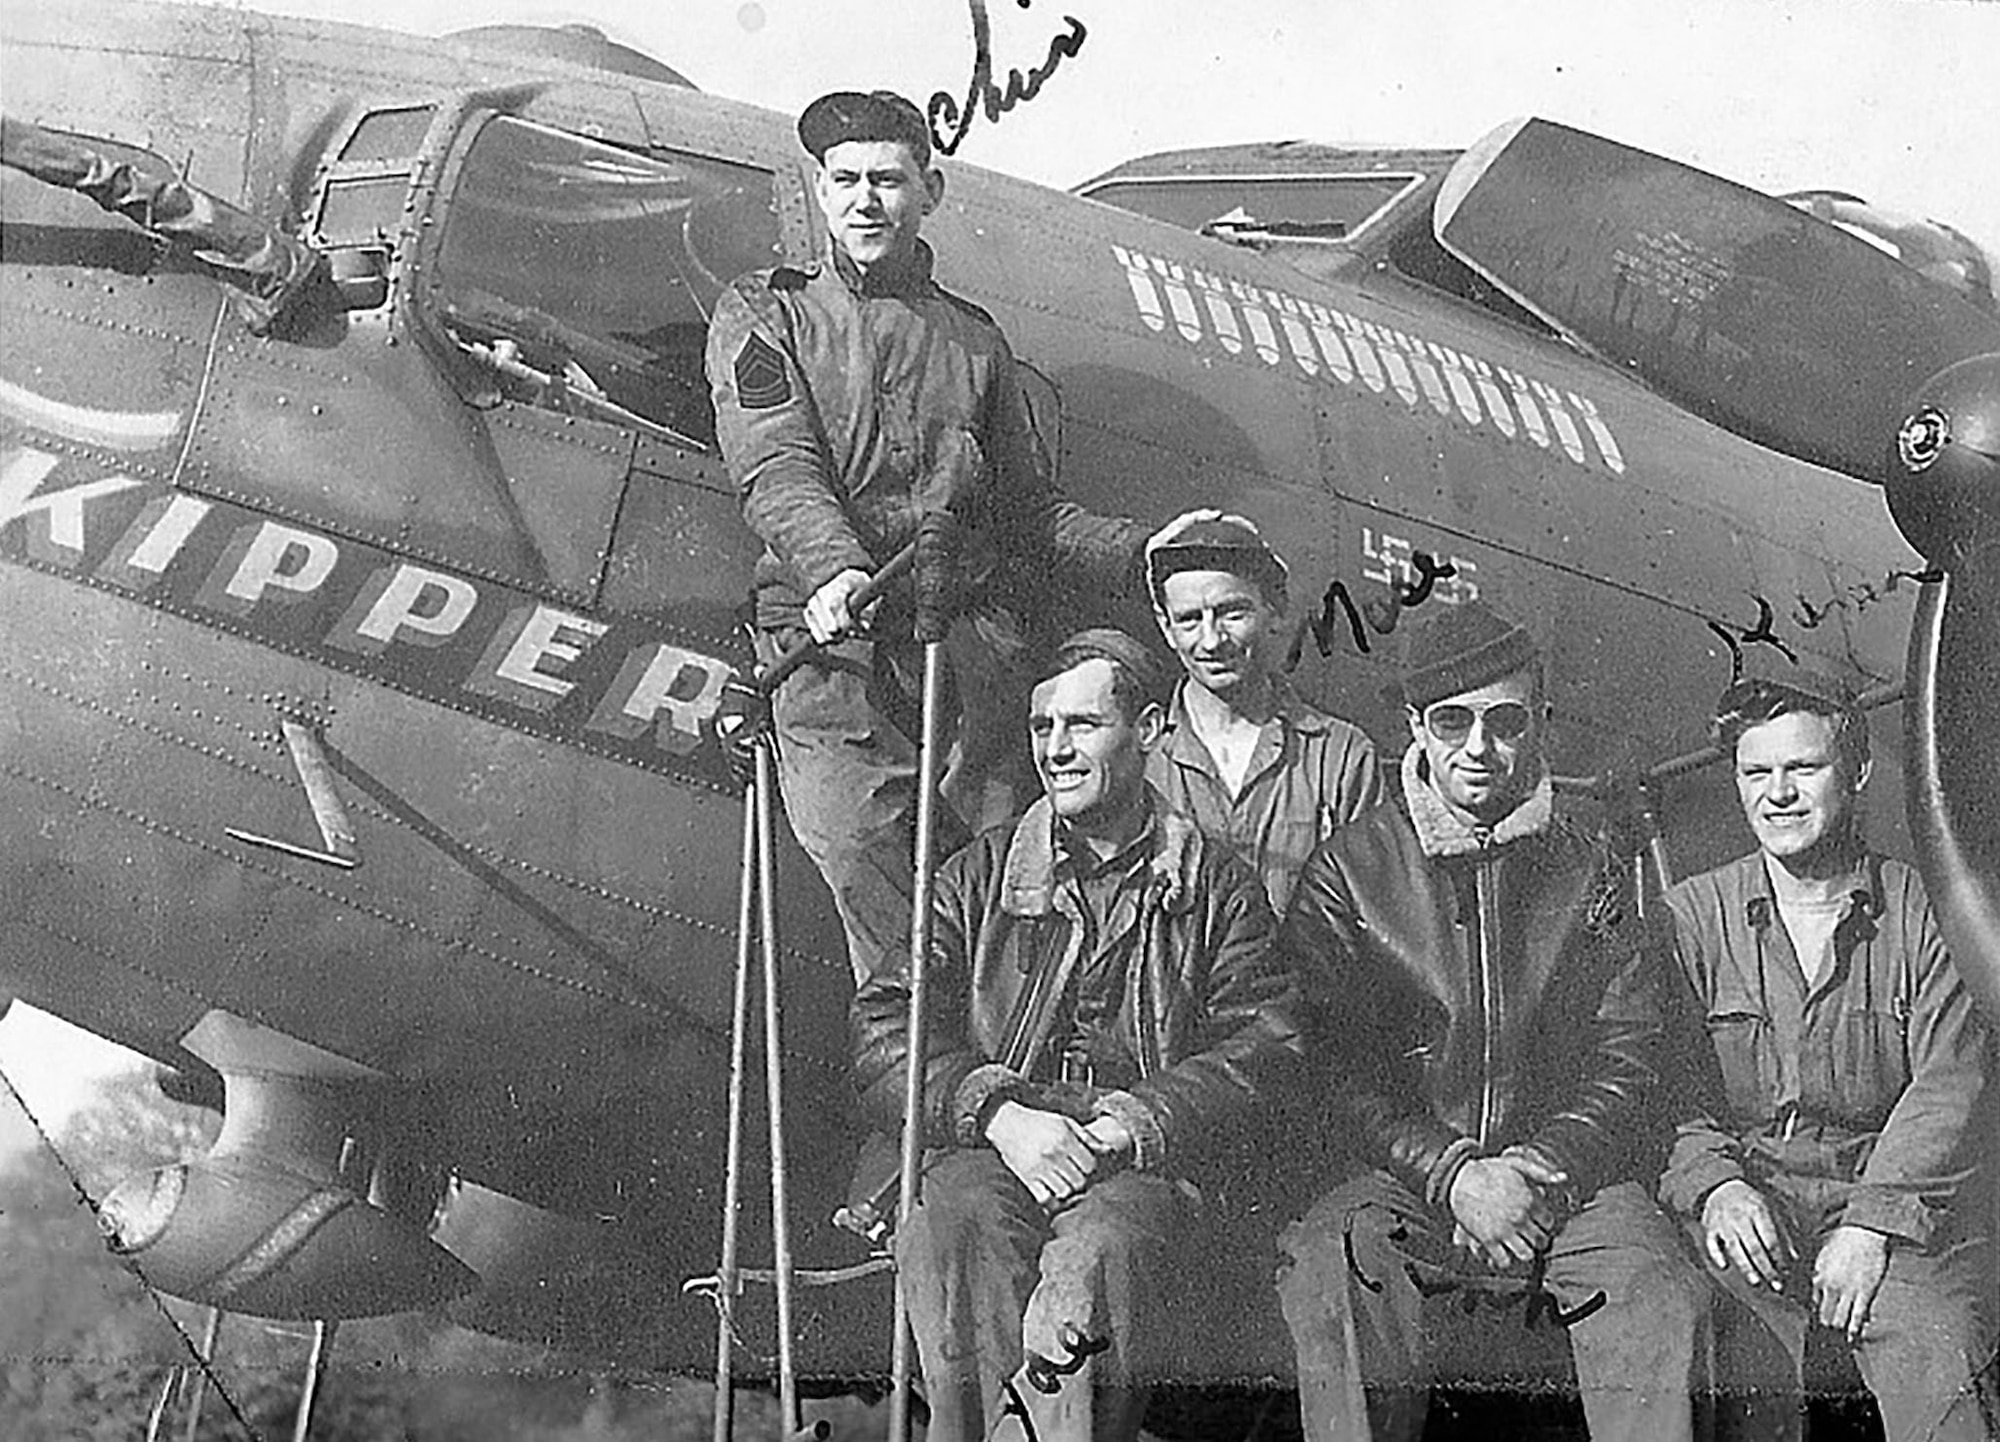 Master Sgt. Dewey Christopher, left, poses for a photo with his ground crew and his first B-17 Flying Fortress, “Skipper” at Thorpe Abbotts, Diss, England, in 1942. Christopher was a crew chief with the 100th Bombardment Group and 351st Bomb Squadron during World War II. He visited RAF Mildenhall in June 2019, when the Professional Development Center was renamed in his honor, and while here shared stories from his military days. (Courtesy photo)